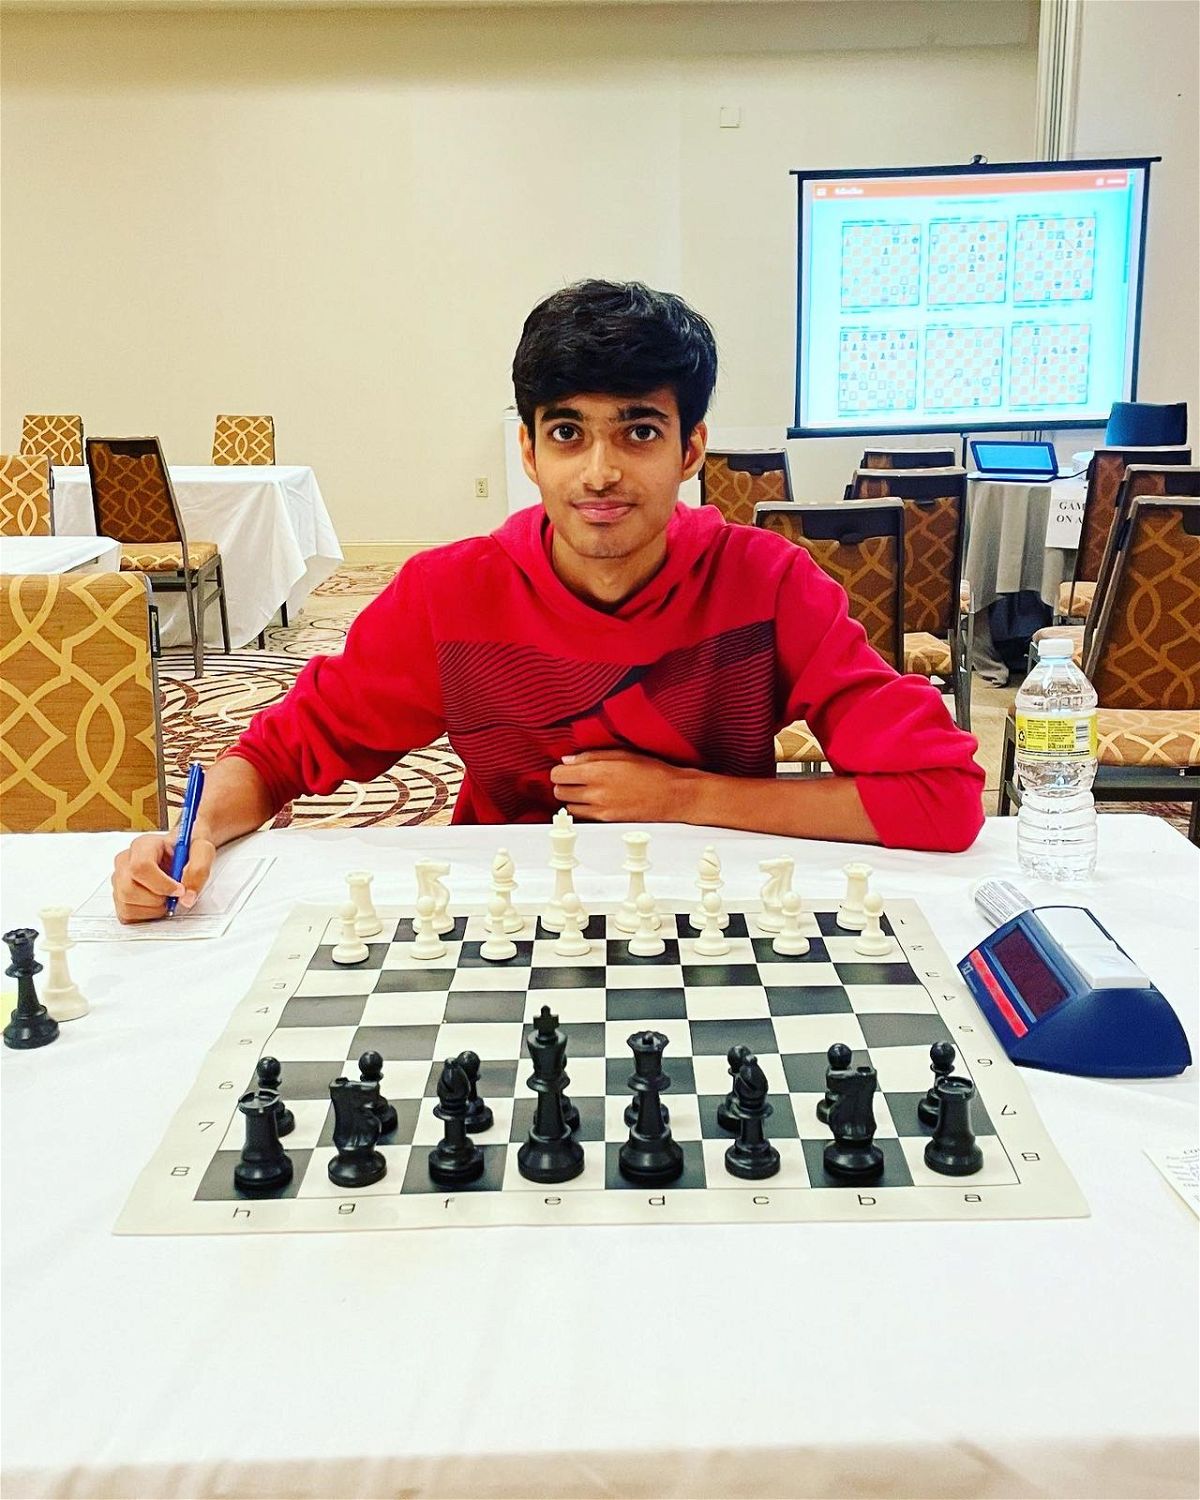 Sagar takes on a 2300 rated player on Lichess